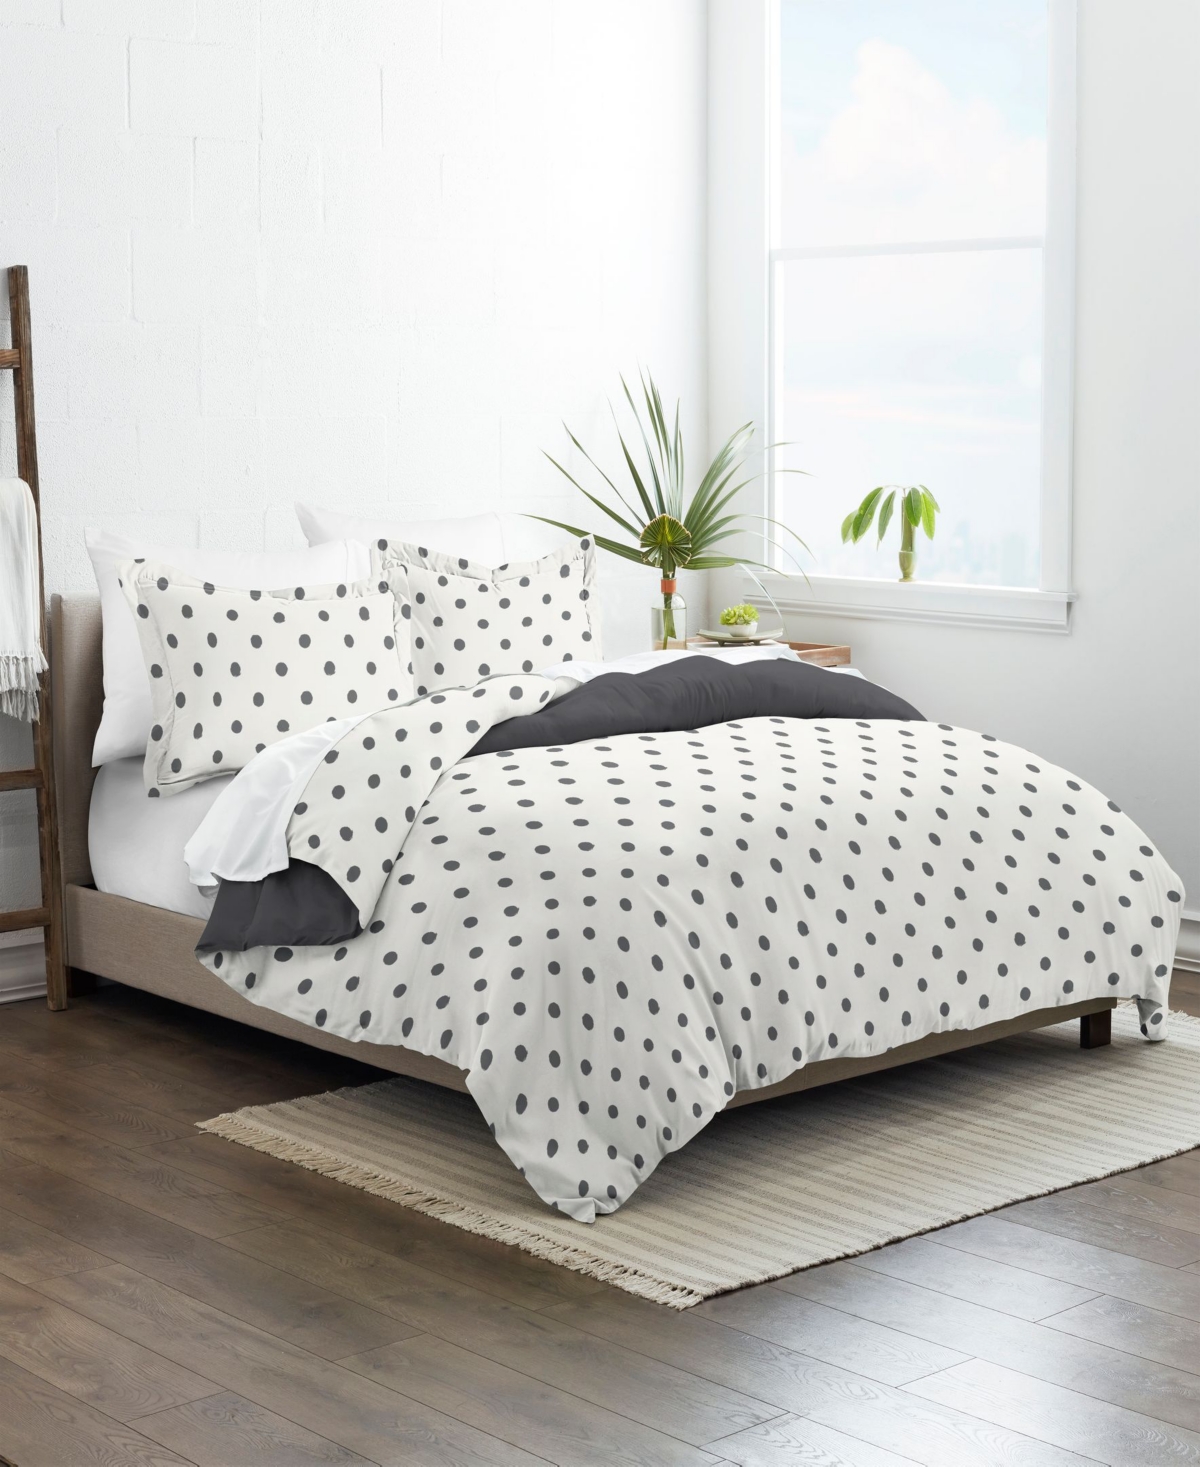 Ienjoy Home Home Collection Premium Ultra Soft 3 Piece Reversible Duvet Cover Set, Queen In Light Gray Polka Dot